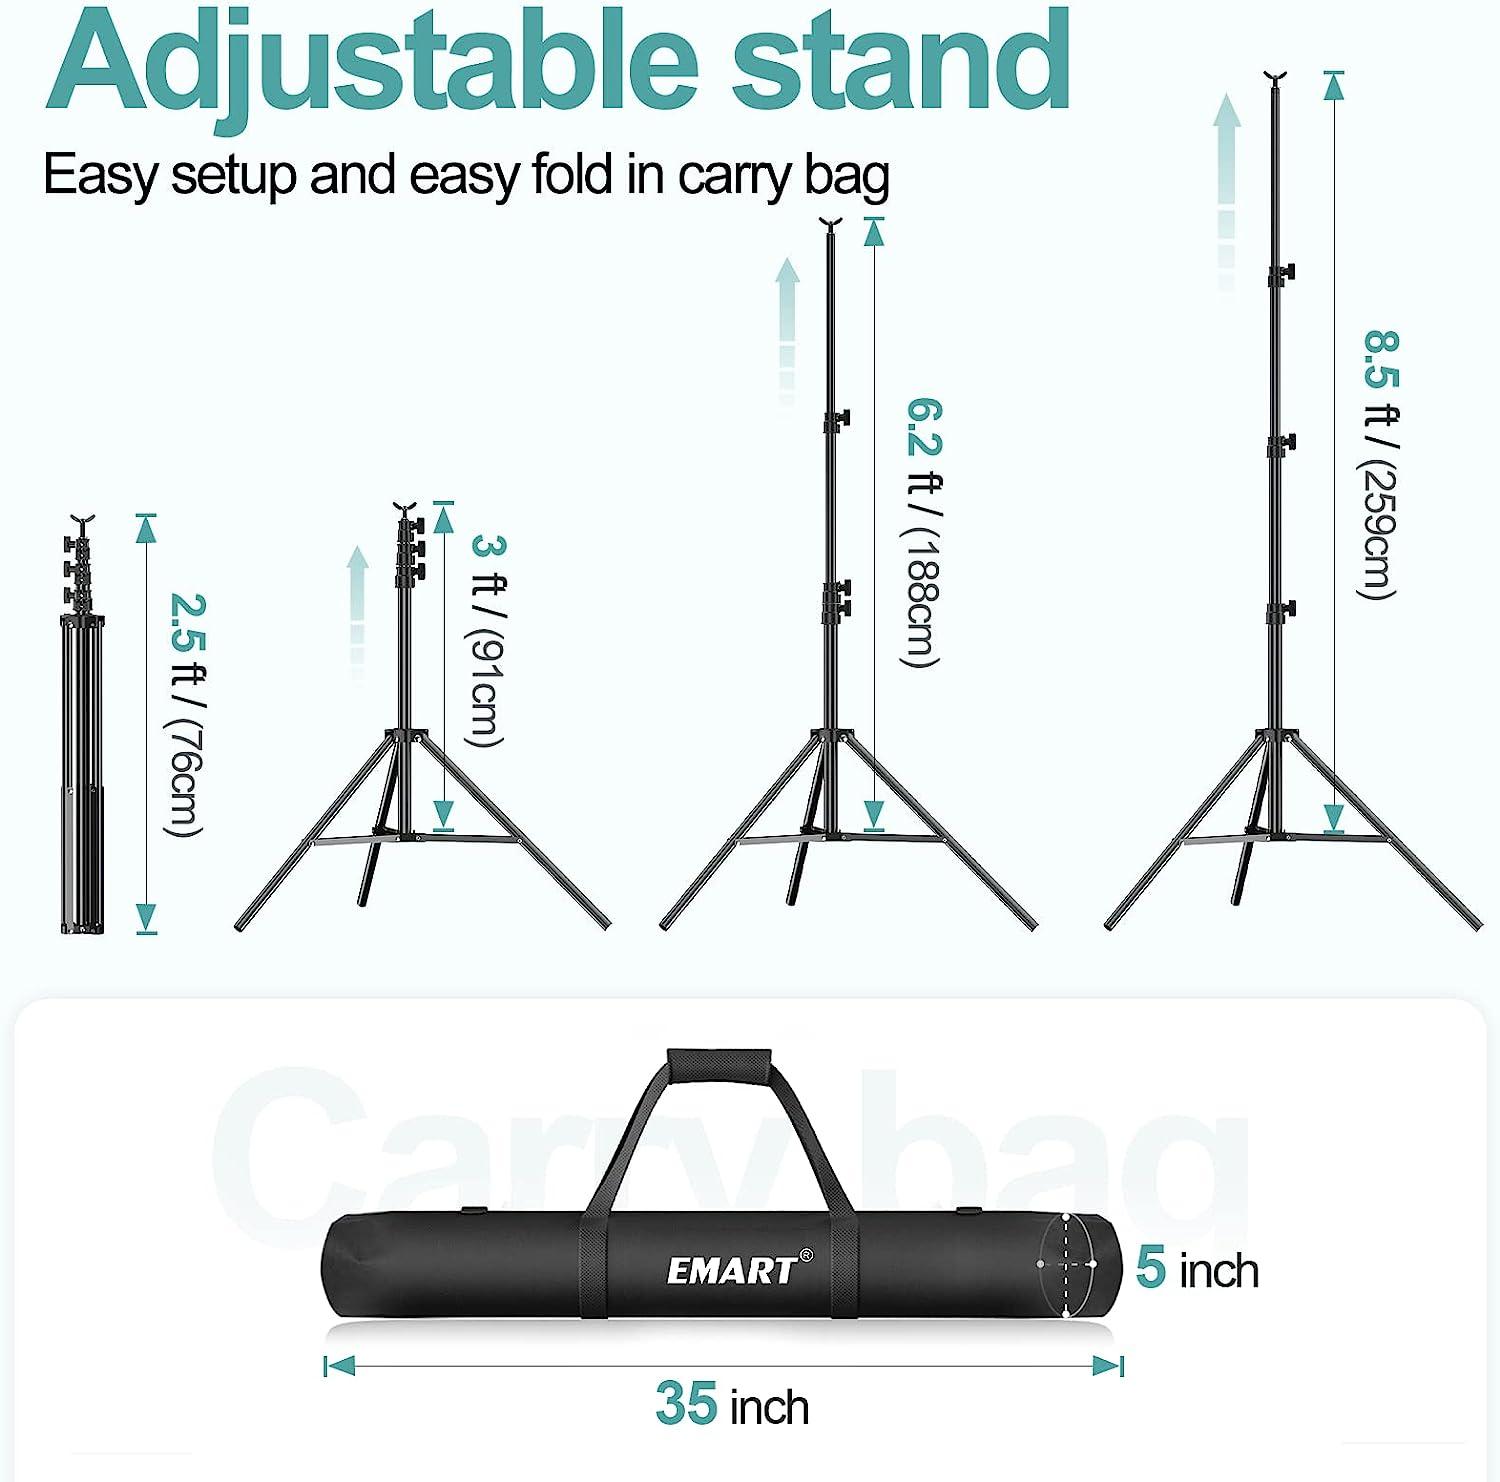 Emart 8.5 x 10 ft Photo Backdrop Stand, Adjustable Photography Muslin Background Support System